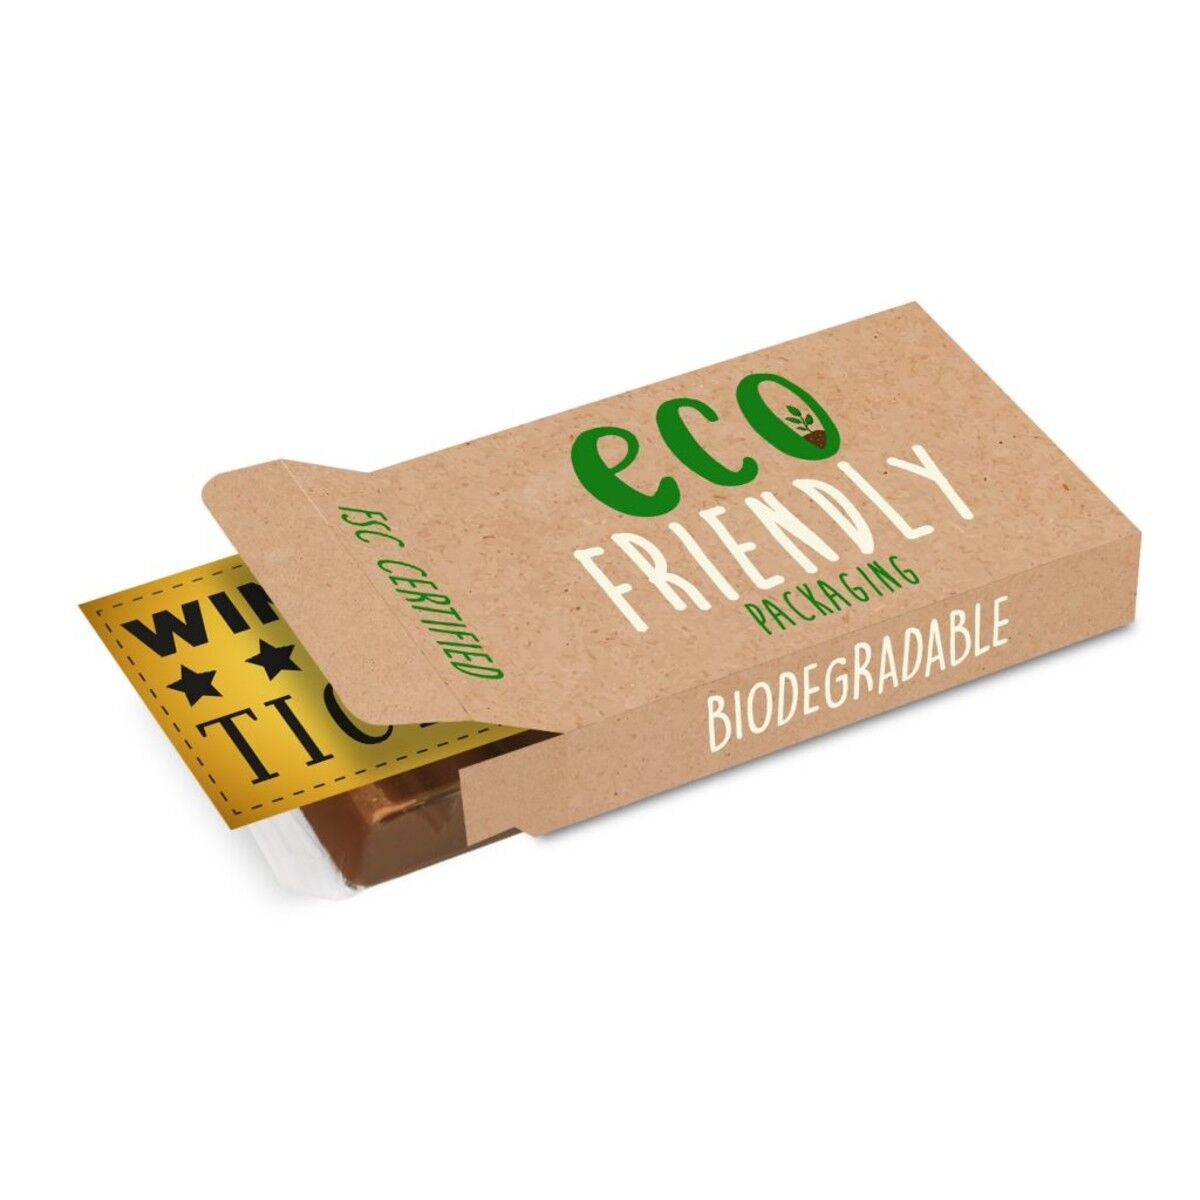 Eco Friendly 6 Bar Chocolate with golden ticket